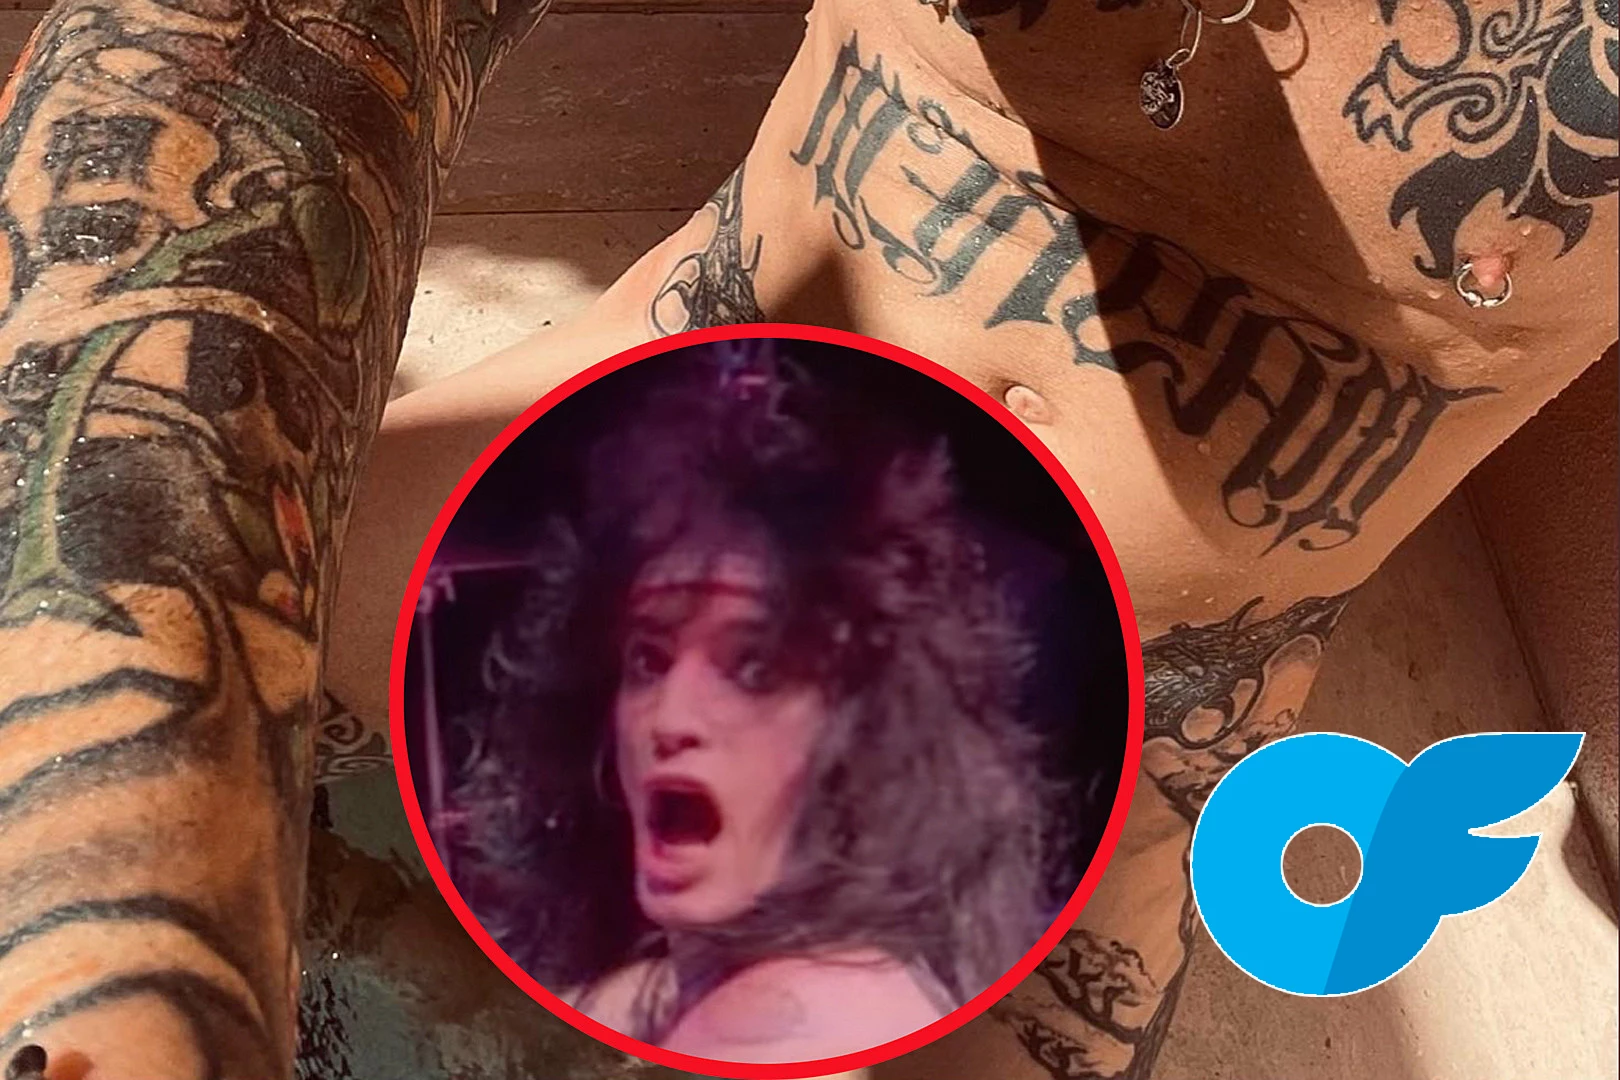 Tommy Lee Posts Fully Nude Photo of